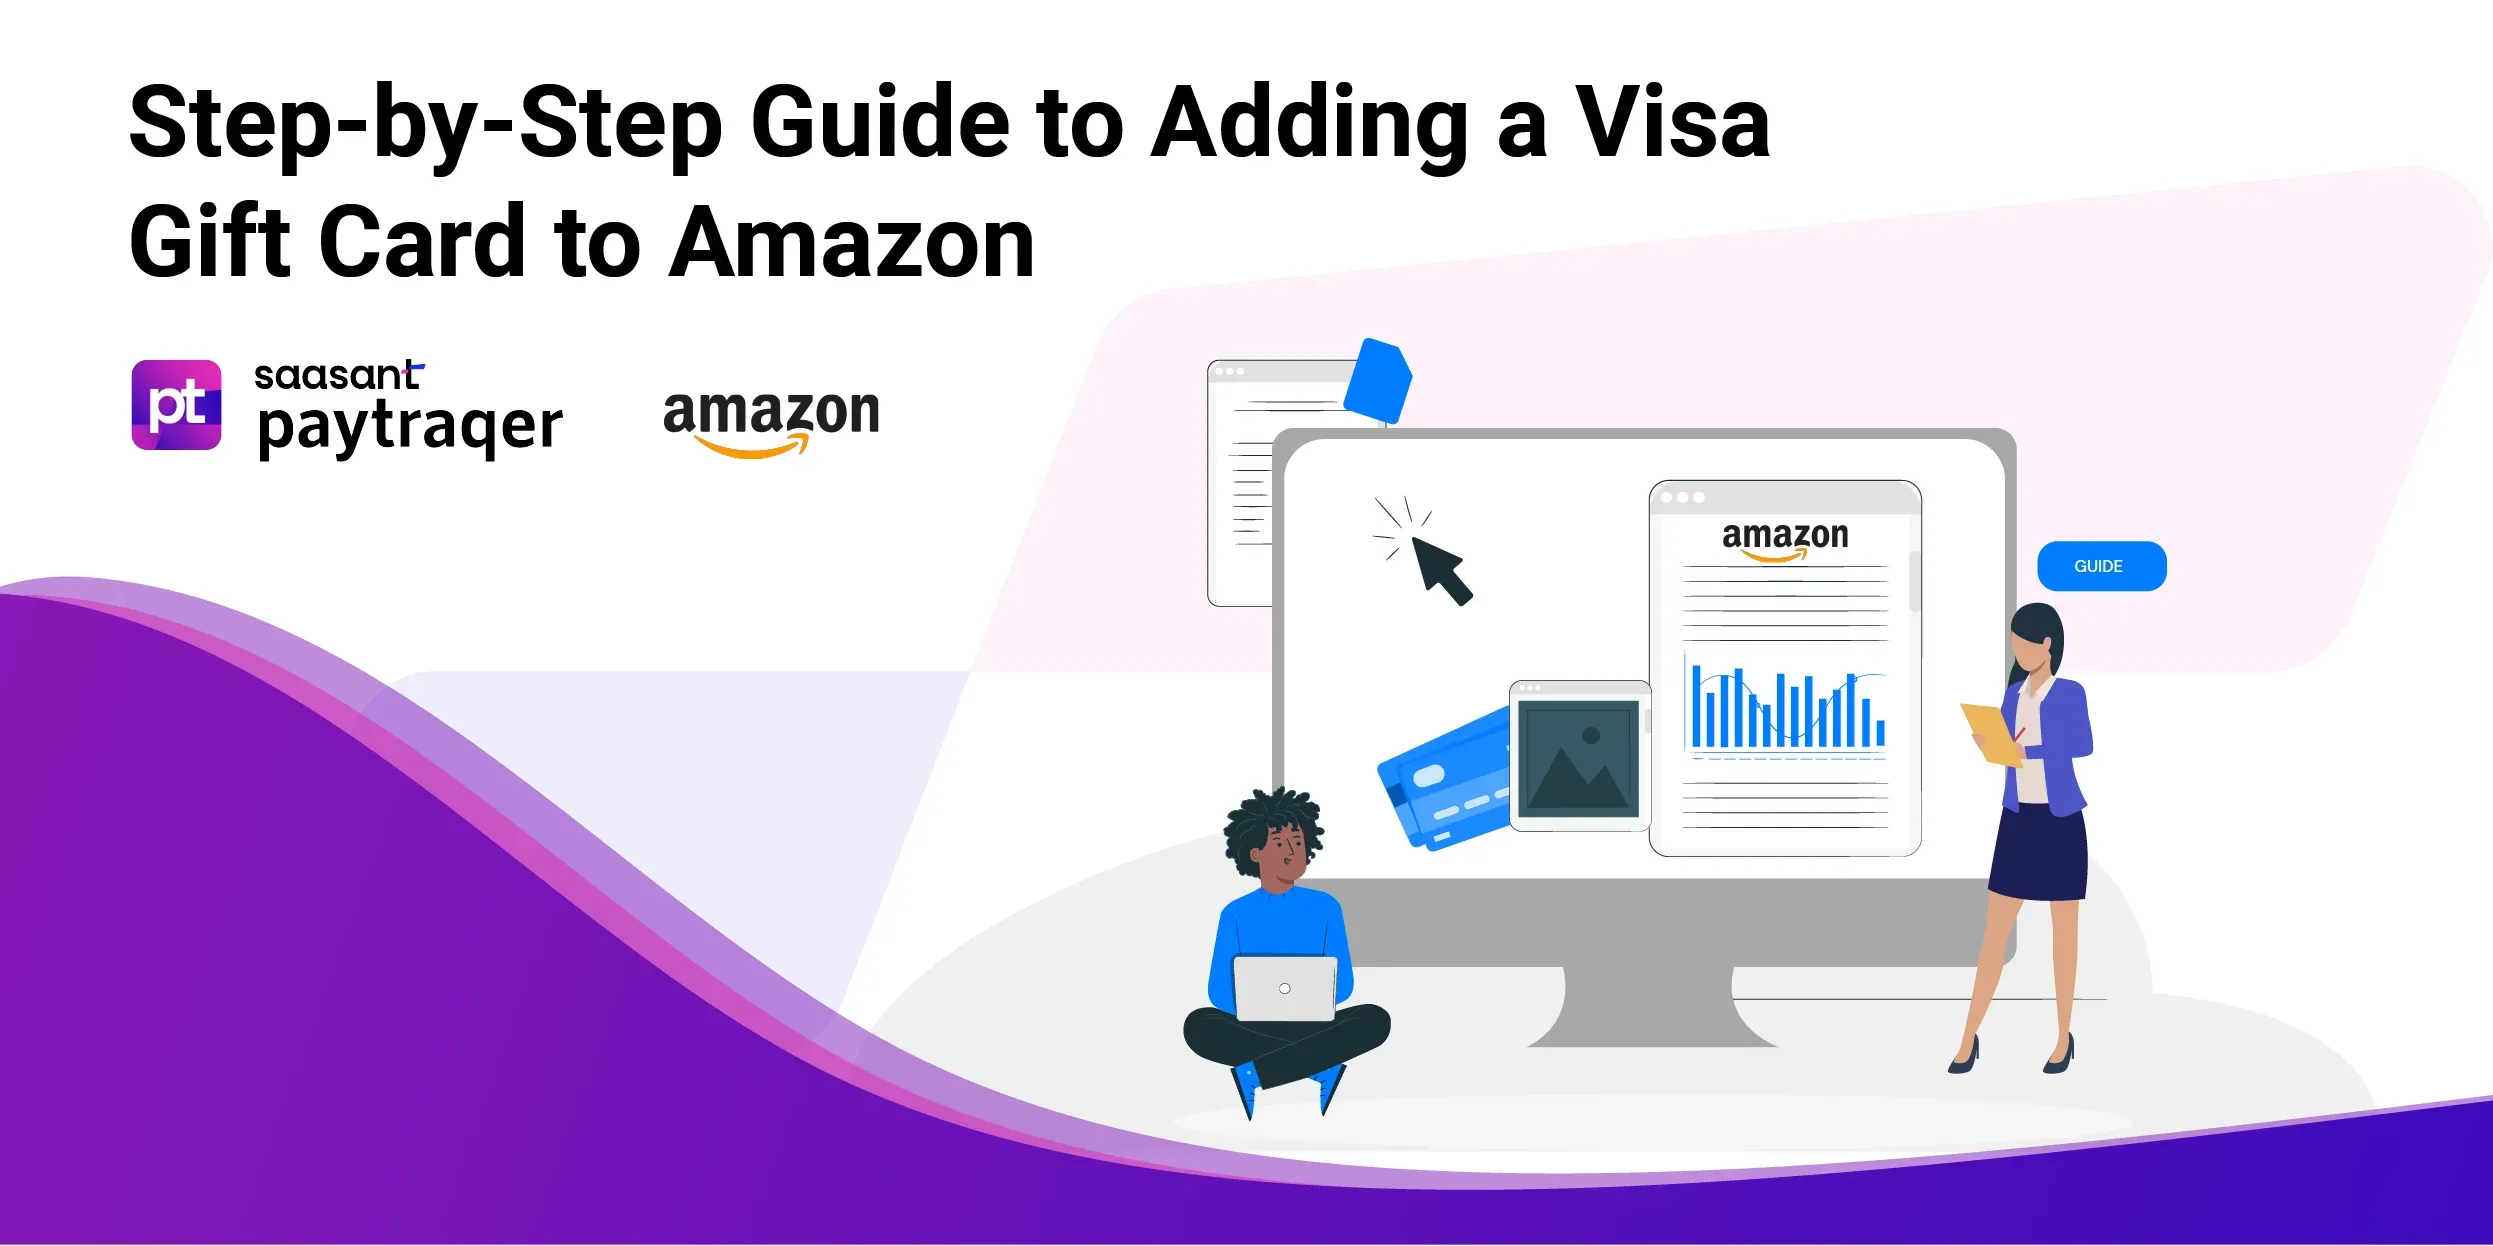 Step-by-Step Guide to Adding a Visa Gift Card to Amazon